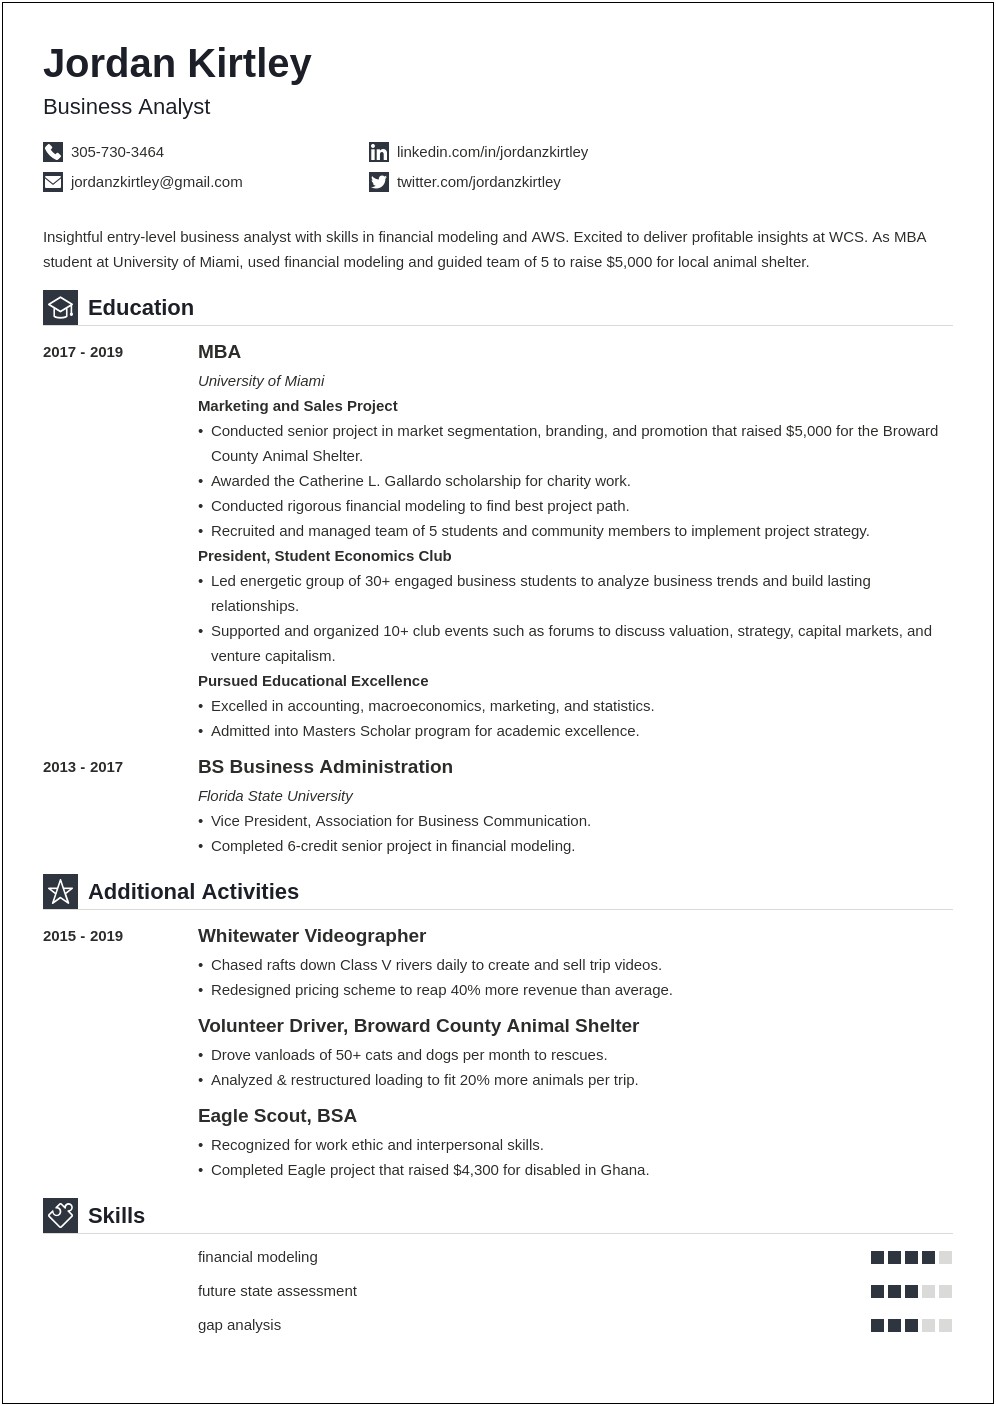 Resume Objective Examples For Business Analyst